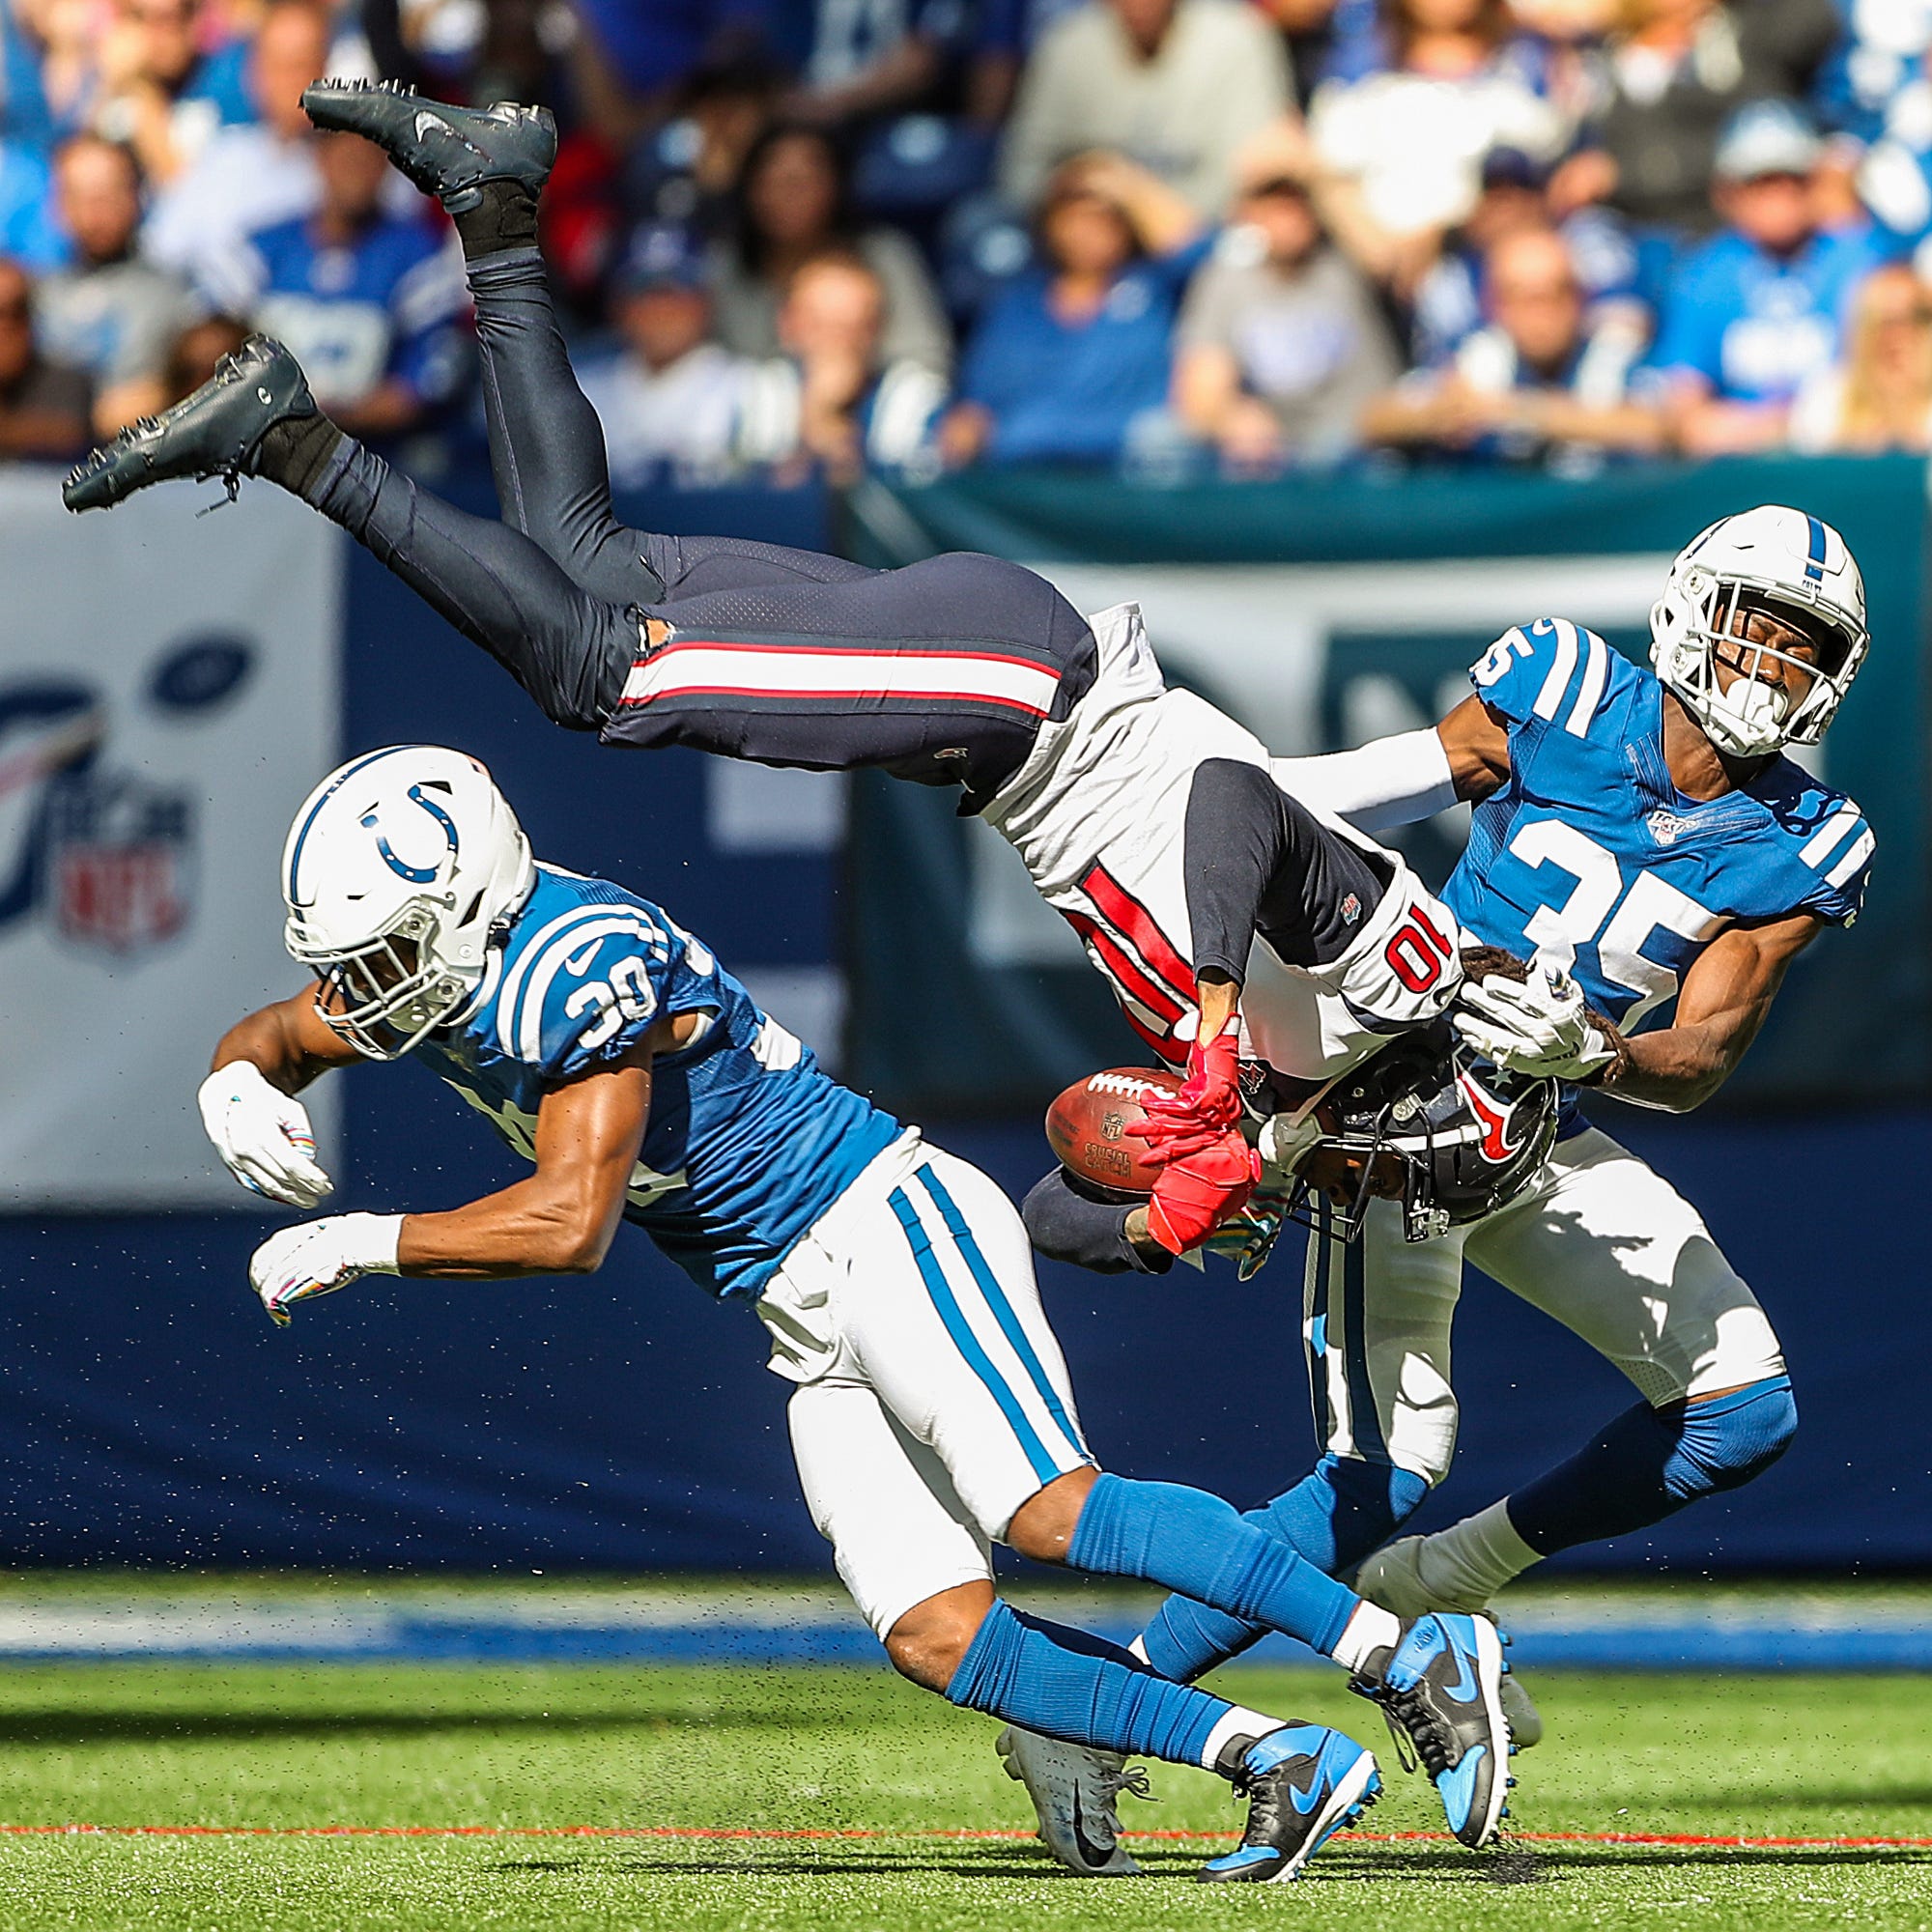 Houston Texans wide receiver DeAndre Hopkins (10) leaps between Indianapolis Colts defensive back George Odum (30) and cornerback Pierre Desir (35) during the second quarter of their game Lucas Oil Stadium in Indianapolis in NFL Week 7, Sunday, Oct. 20, 2019. Indystar Staff Photographer Jenna Watson Best Photos Of The Year 2019